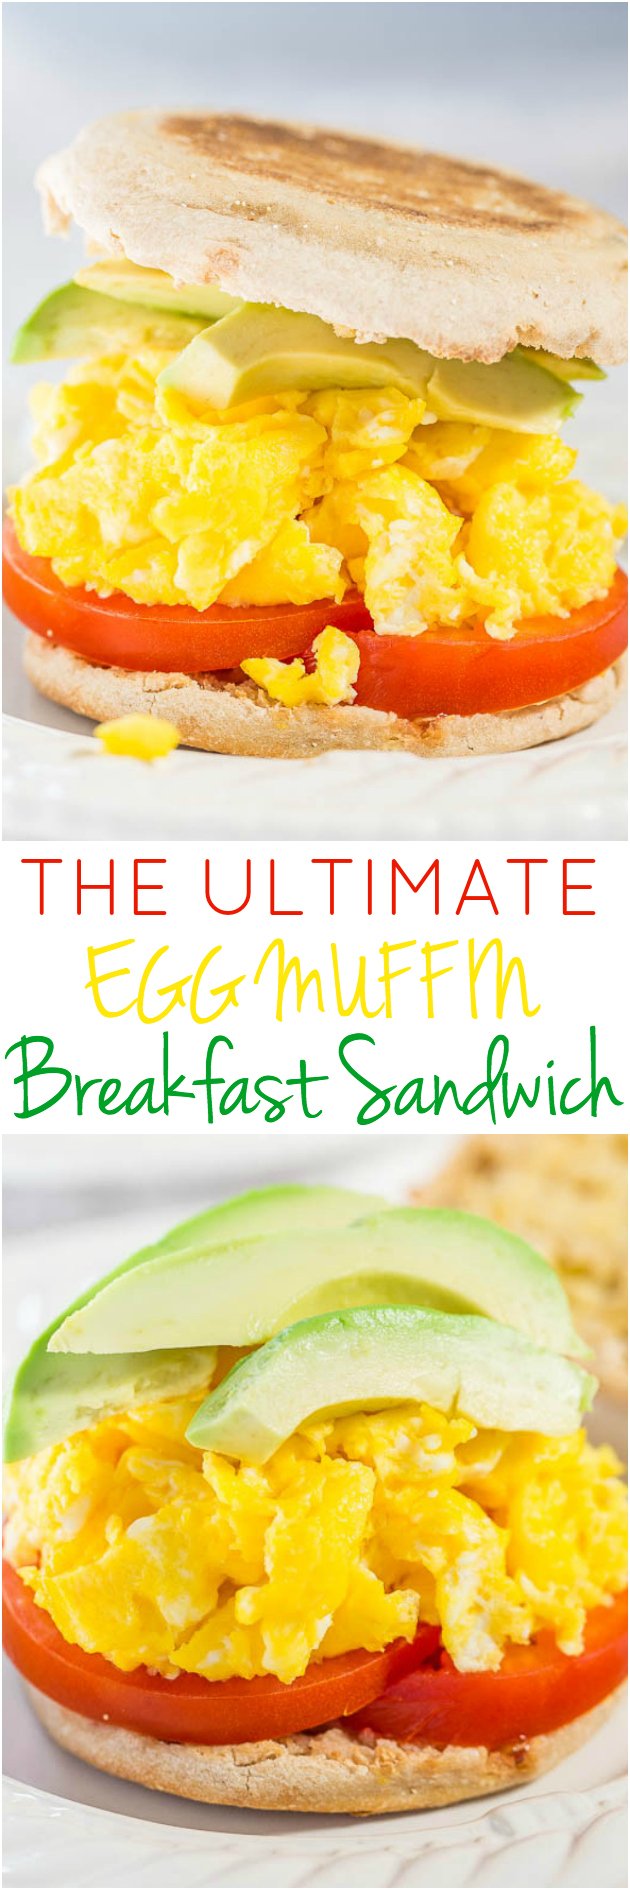 The Ultimate Egg Muffin Breakfast Sandwich - Skip the drivethru and make your own breakfast sandwich in 10 minutes! Healthier, tastes way better, and freezer-friendly for a grab-and-go easy breakfast!